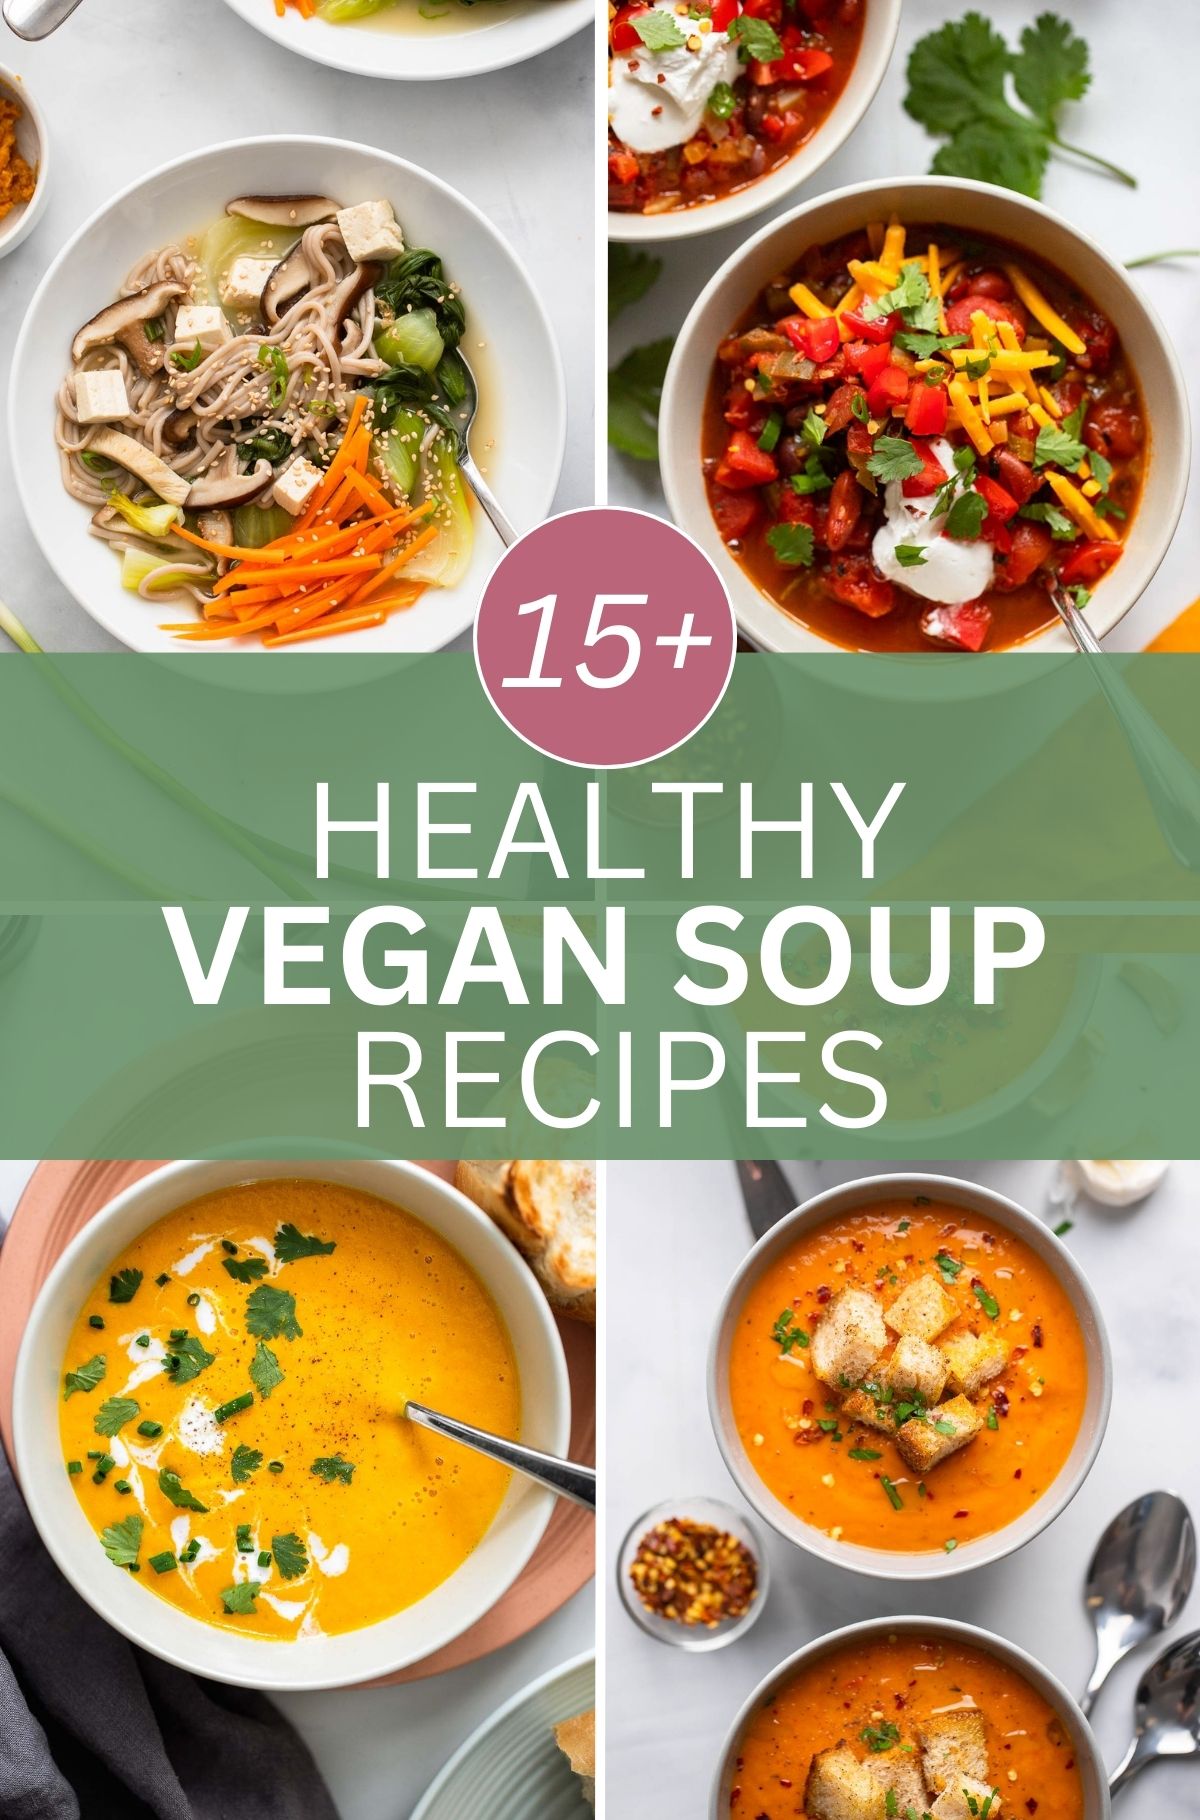 healthy vegan soup recipe collage with 4 images of soup and text overlay that says 15+ healthy vegan soup recipes.